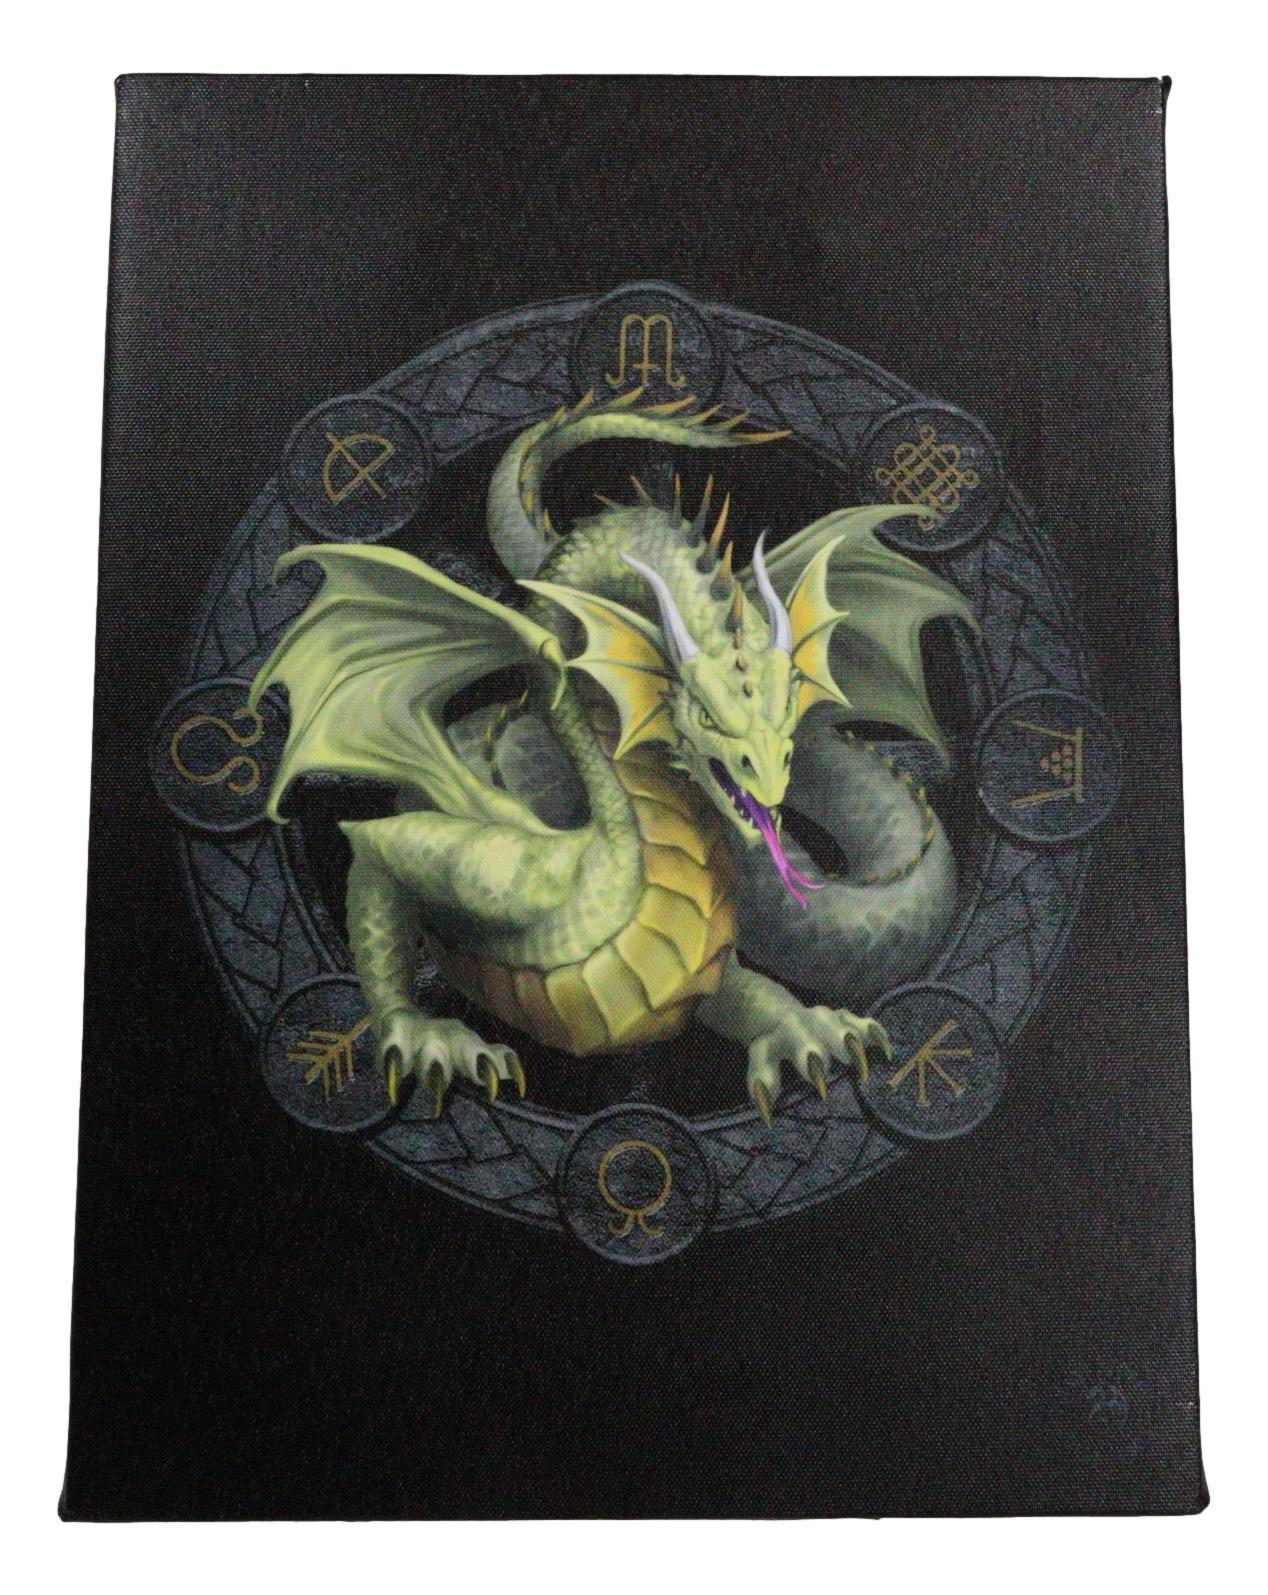 Primary image for Anne Stokes Mabon Drake Sabbats Wheel of The Year Dragon Canvas Wall Decor